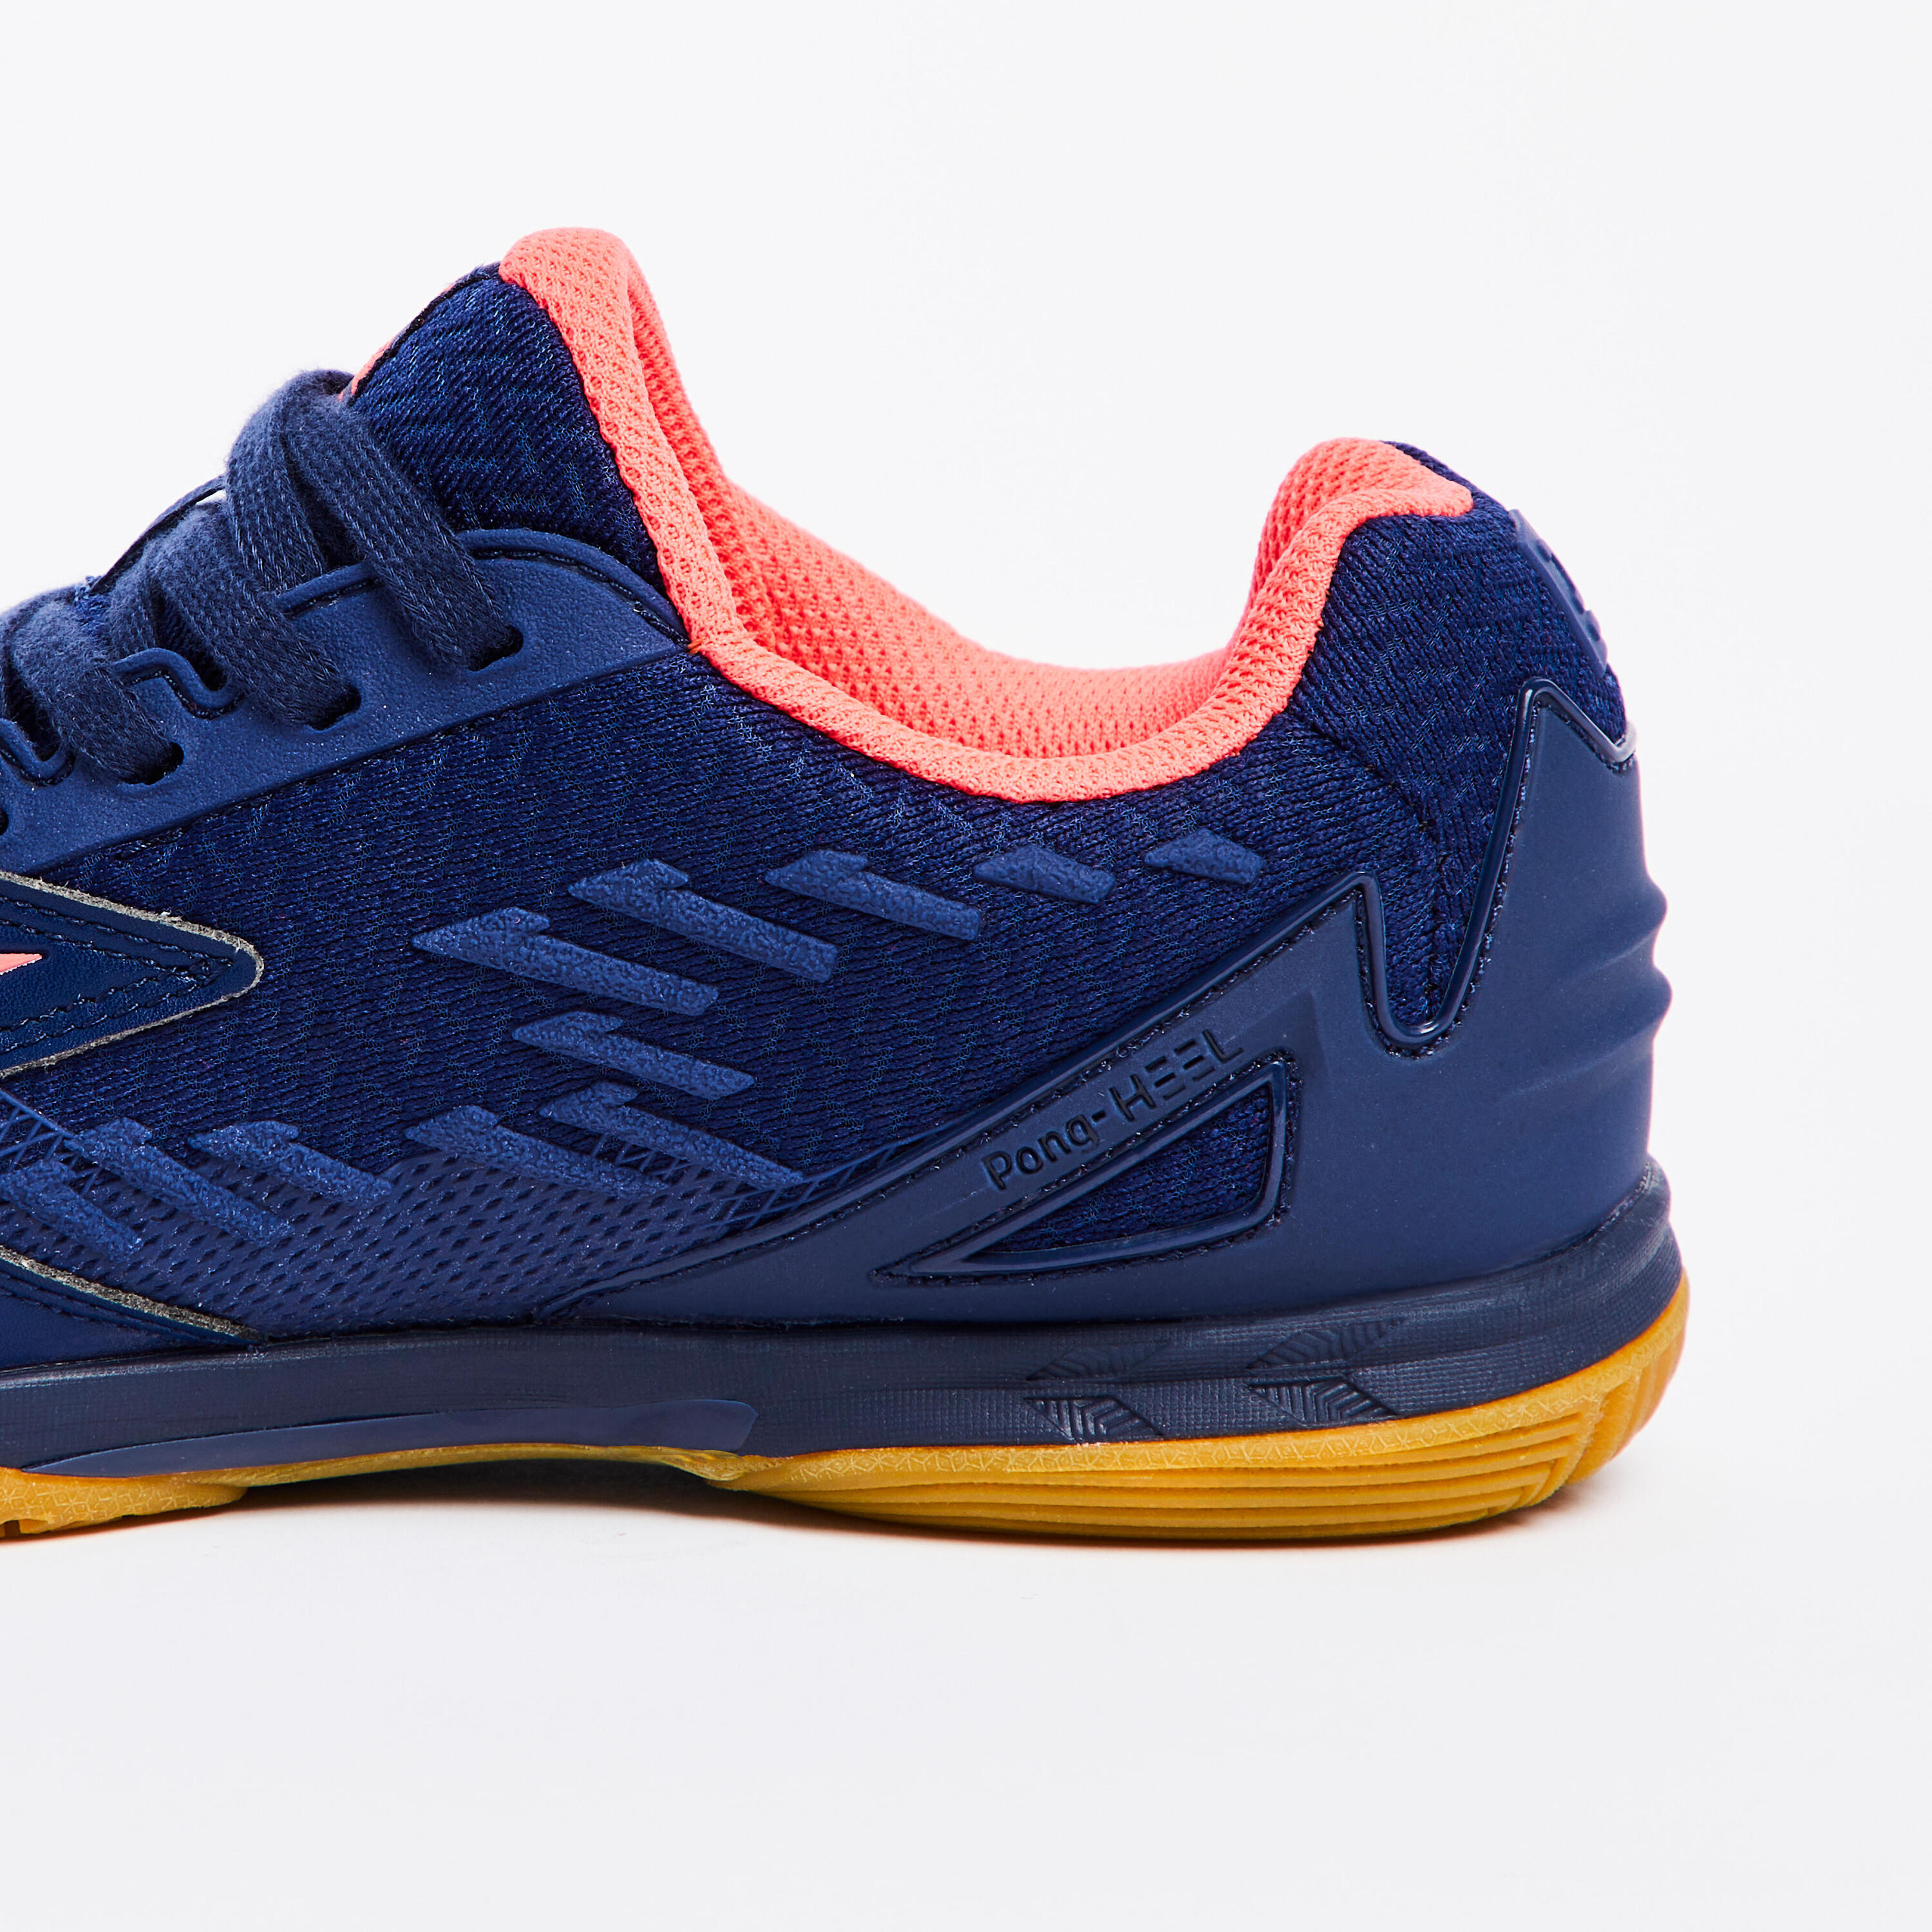 Table Tennis Shoes TTS 900 - Blue/Pink 6/8